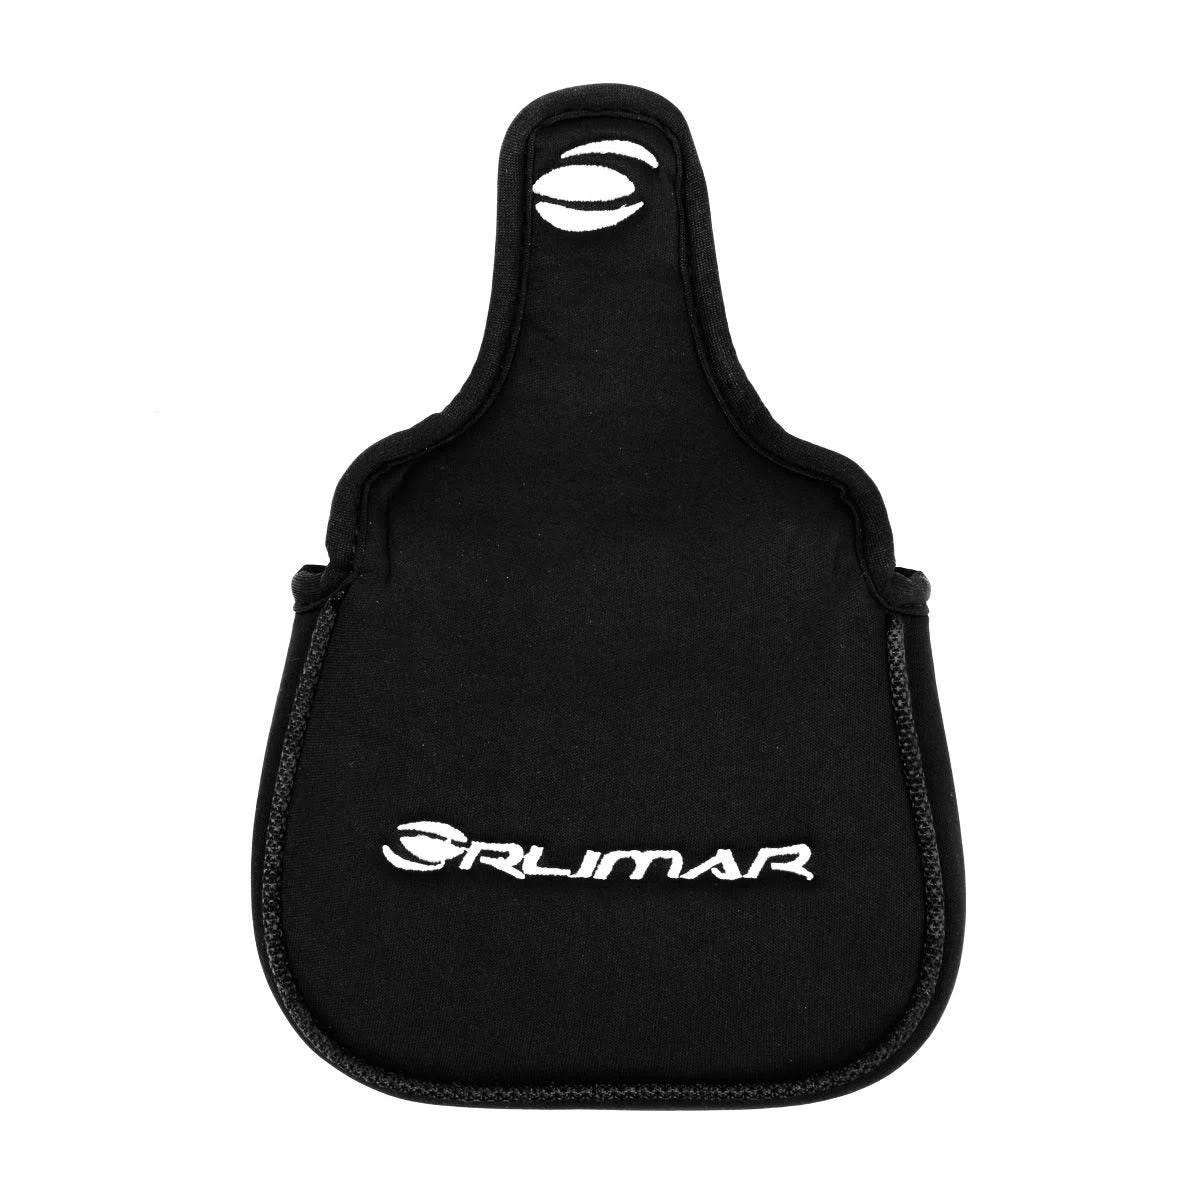 Orlimar Square Mallet Putter Headcover for Hard-to-Fit Putters | Image